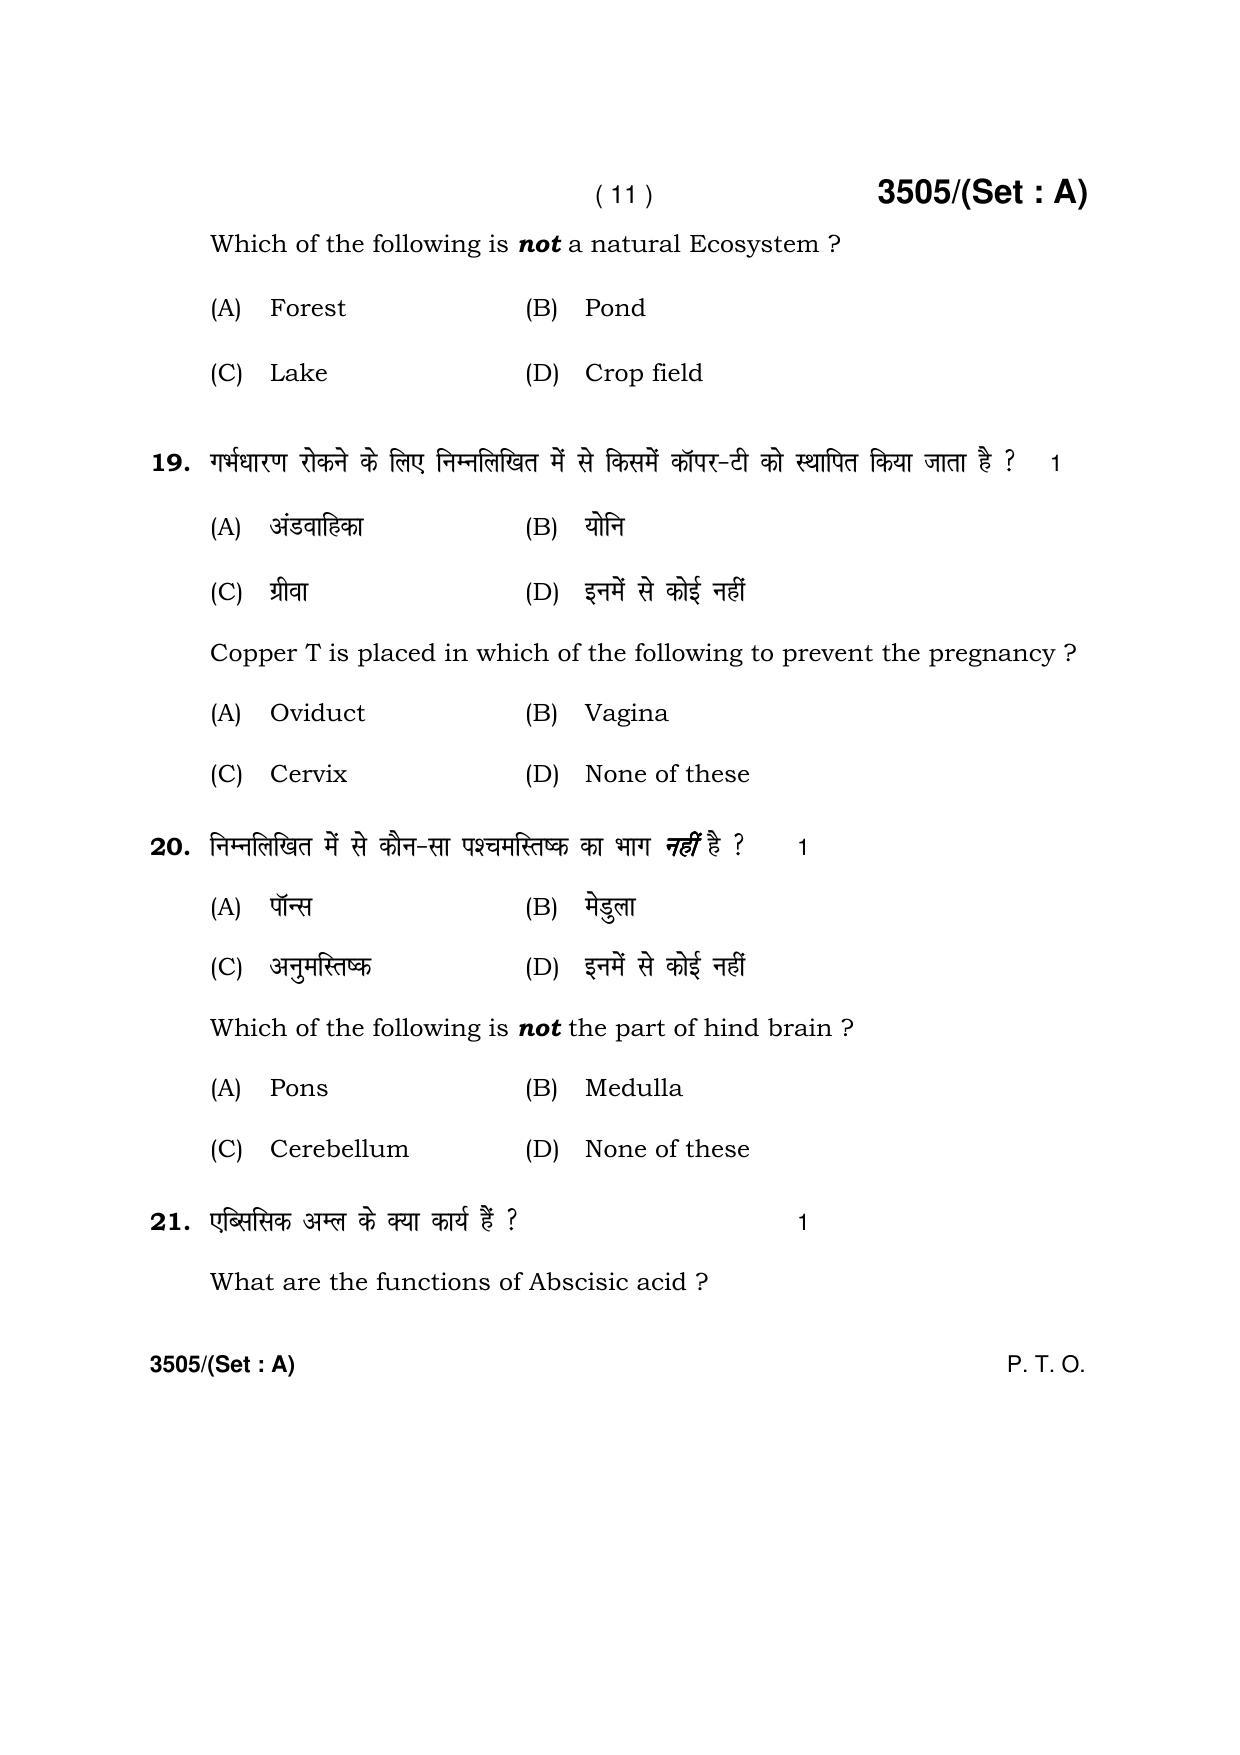 Haryana Board HBSE Class 10 Science -A 2018 Question Paper - Page 11